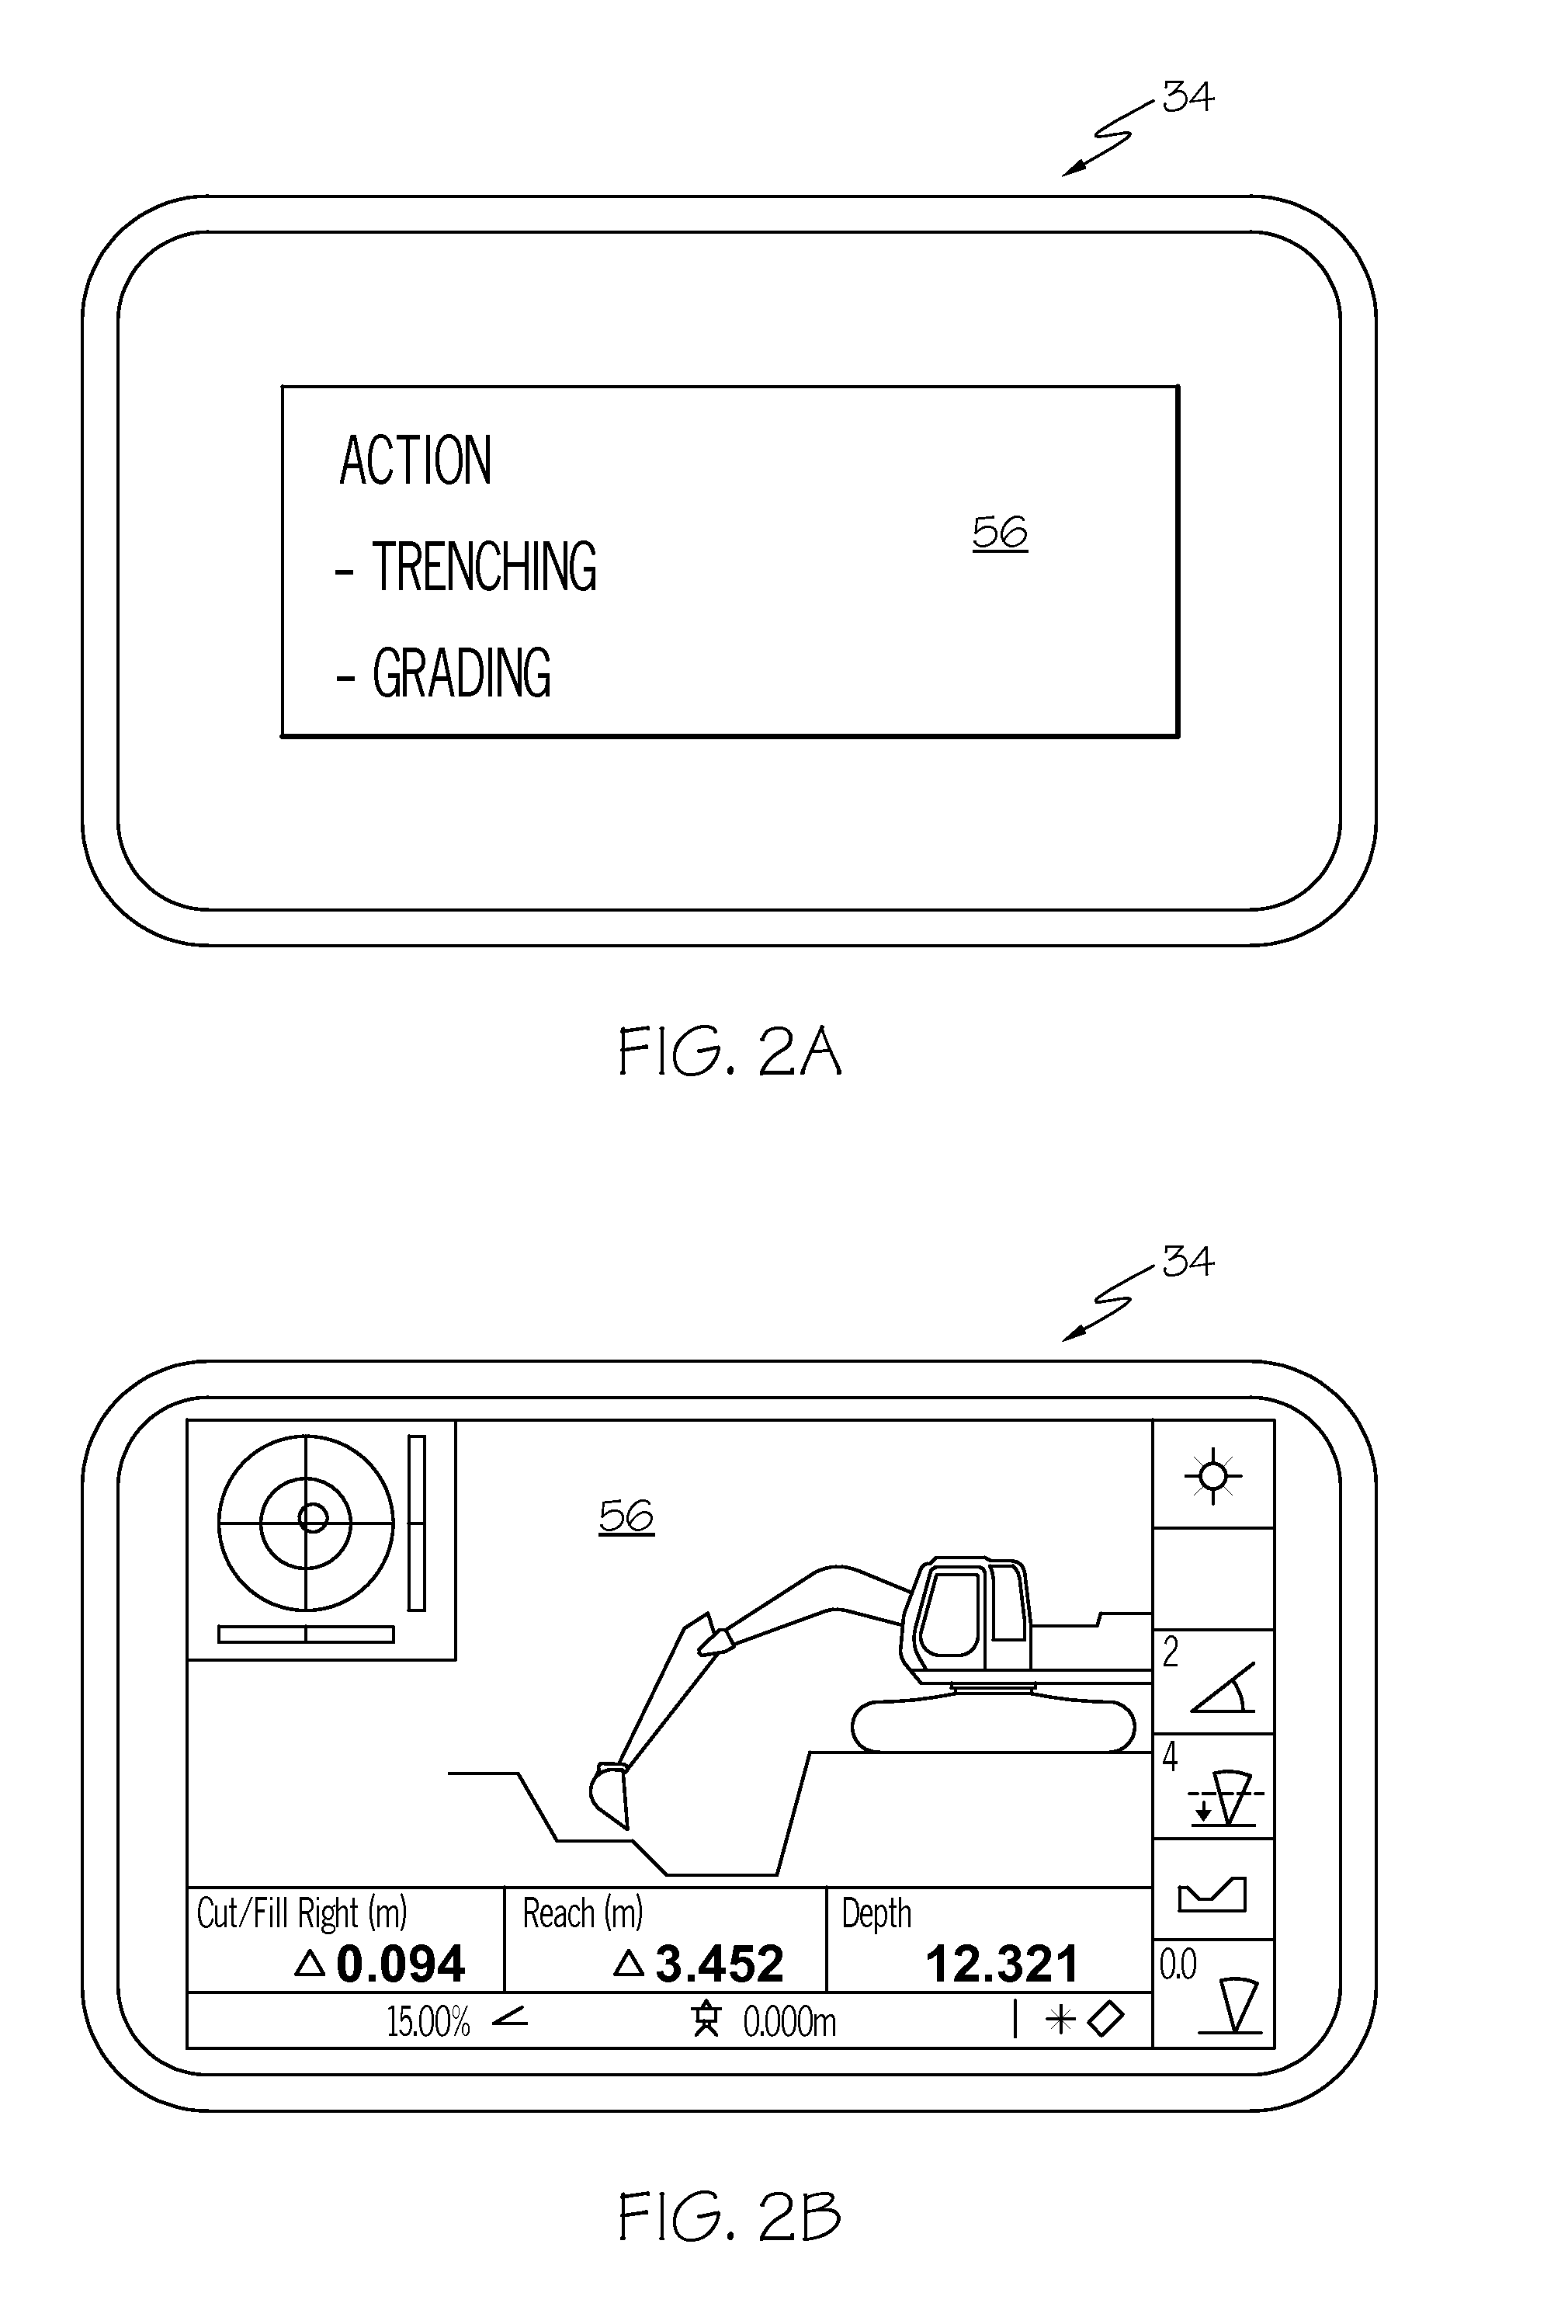 Machine control and guidance system incorporating a portable digital media device